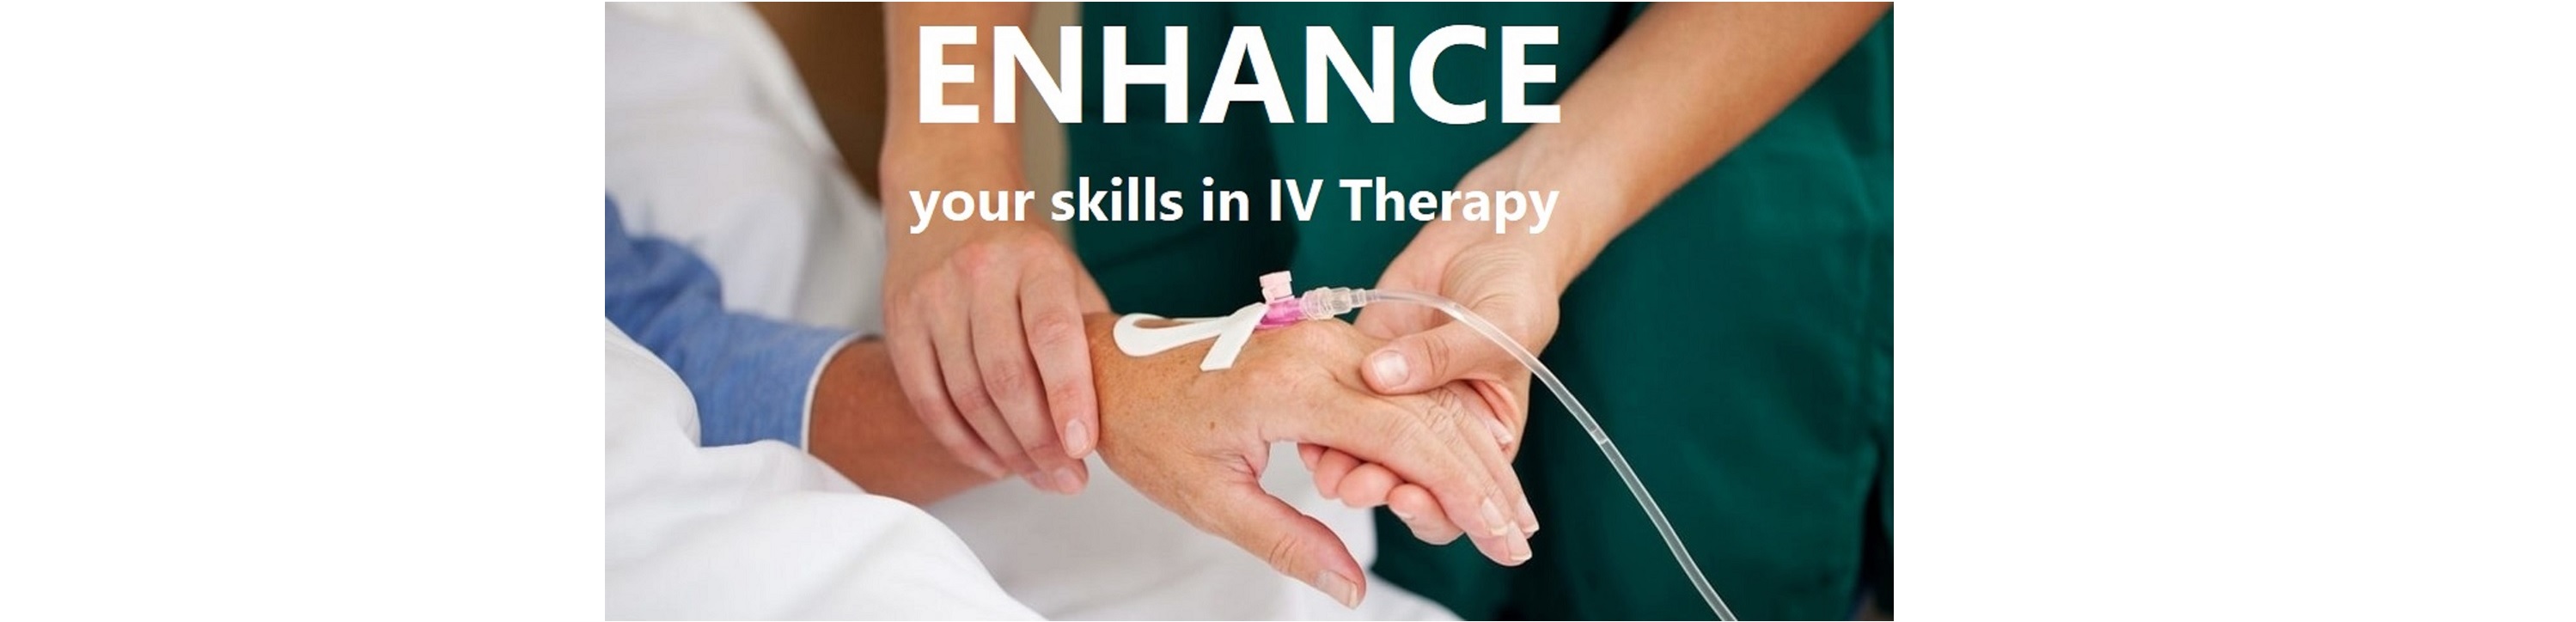 IV Therapy Training Course - June 2022 Banner